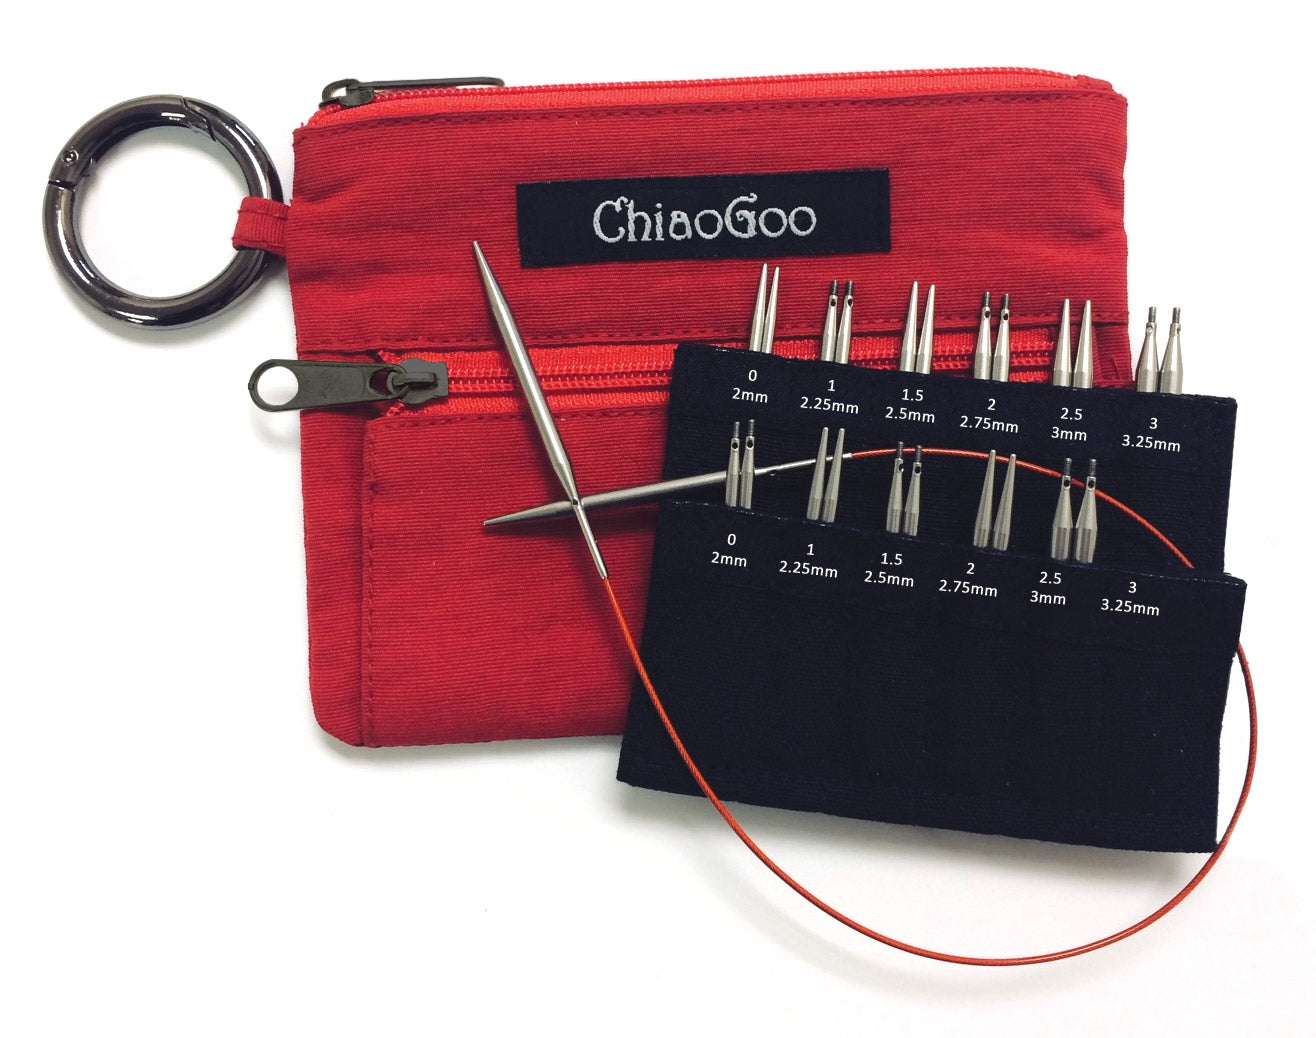 ChiaoGoo TWIST 2-Inch 3-Inch Shorties Red Set US-0 - US-3 Stainless Steel Interchangeable Knitting Needles